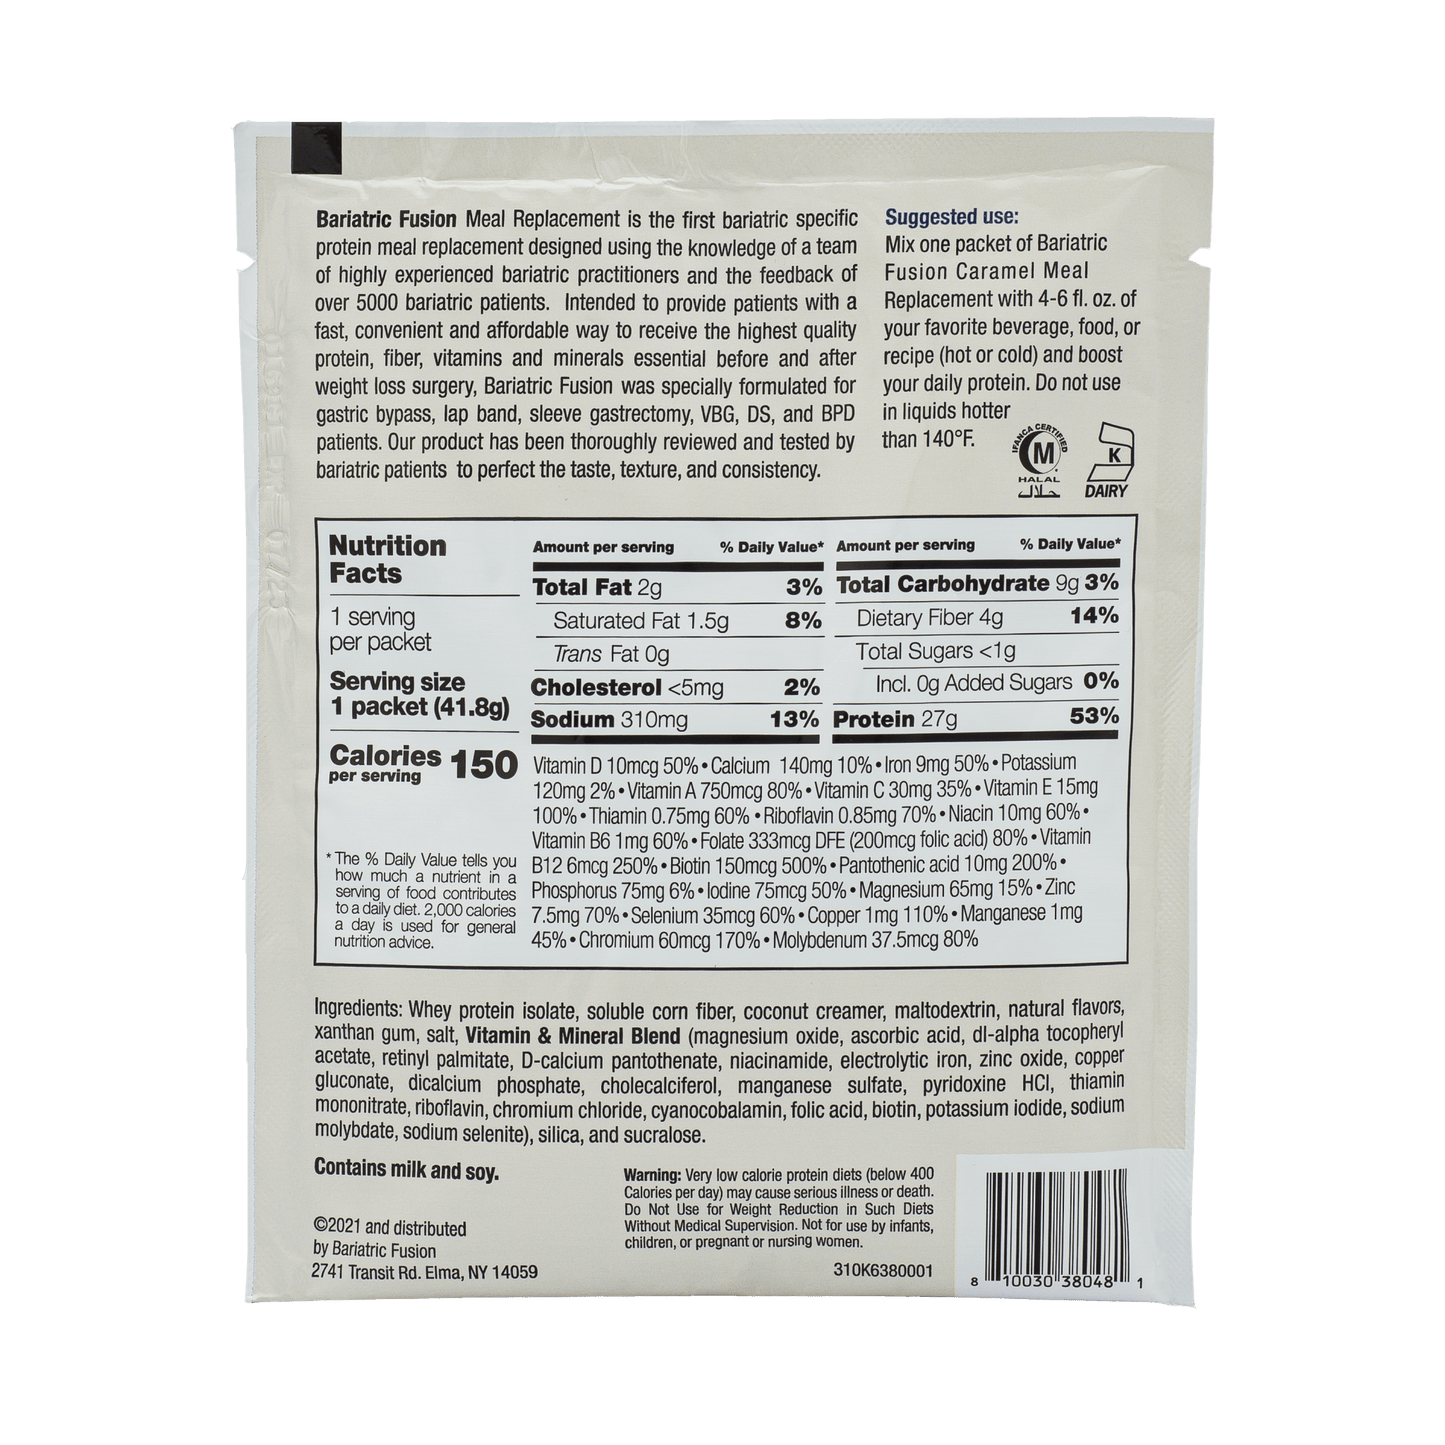 Caramel High Protein Meal Replacement - Single Serve Packet - Bariatric Fusion